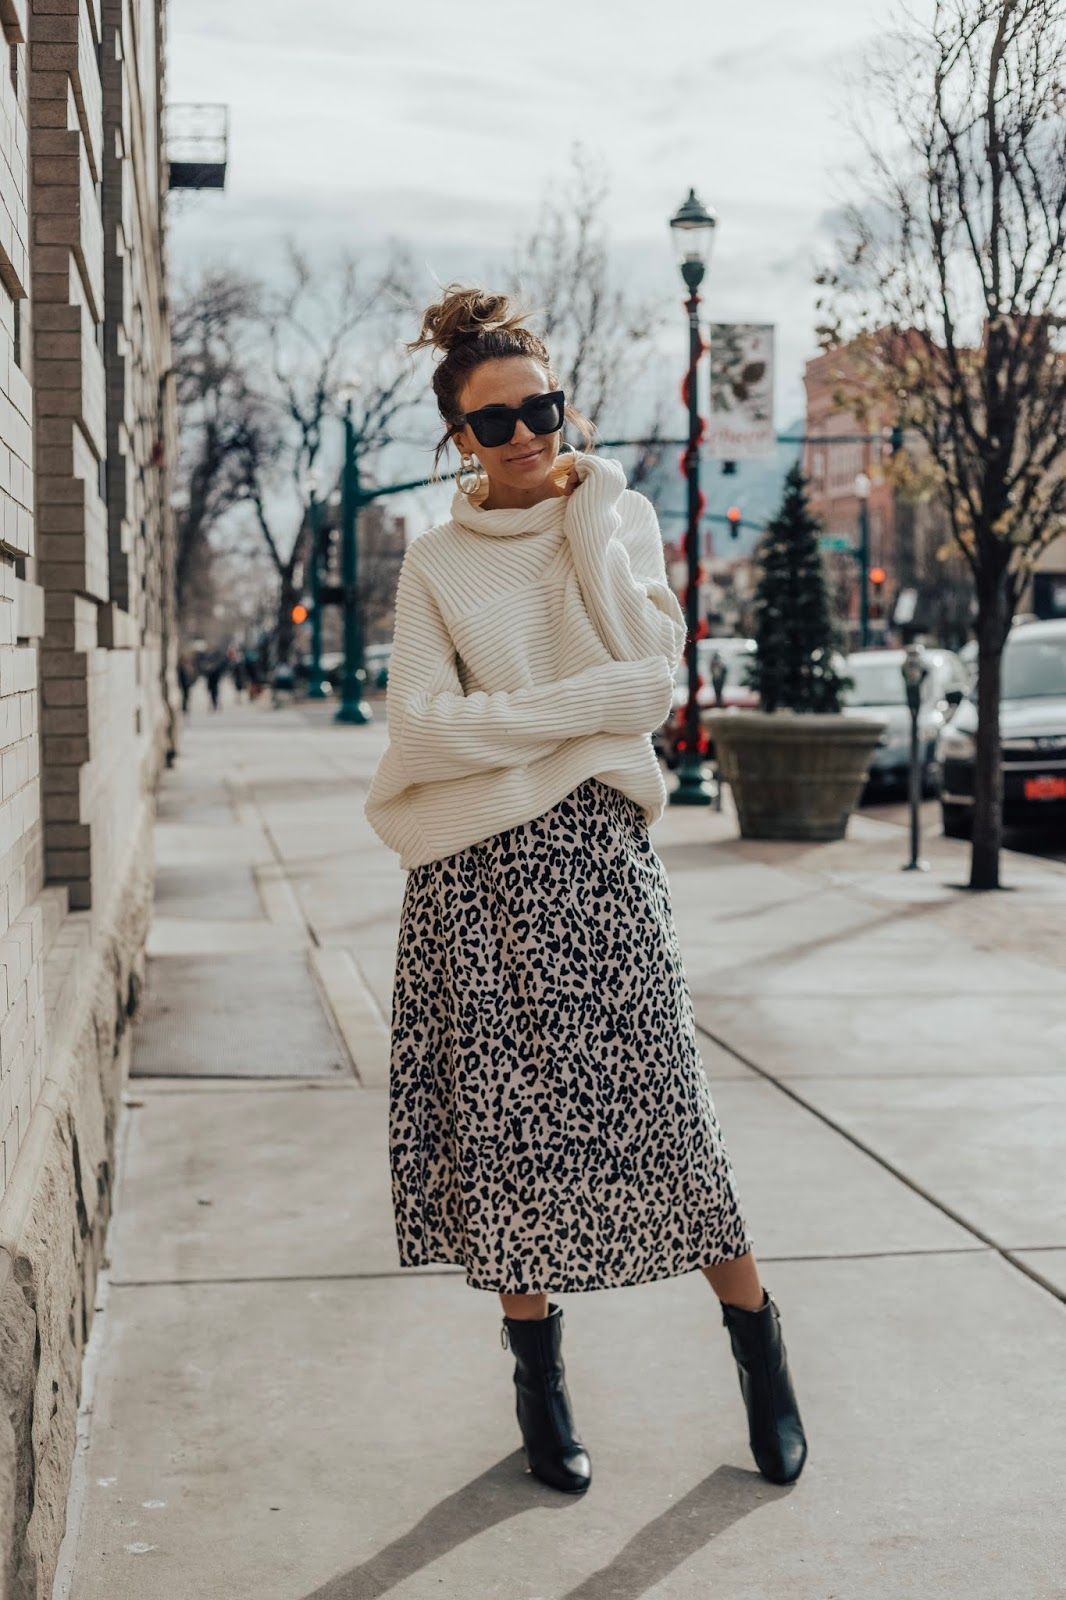 How to Style Skirts in Winter | Lugako